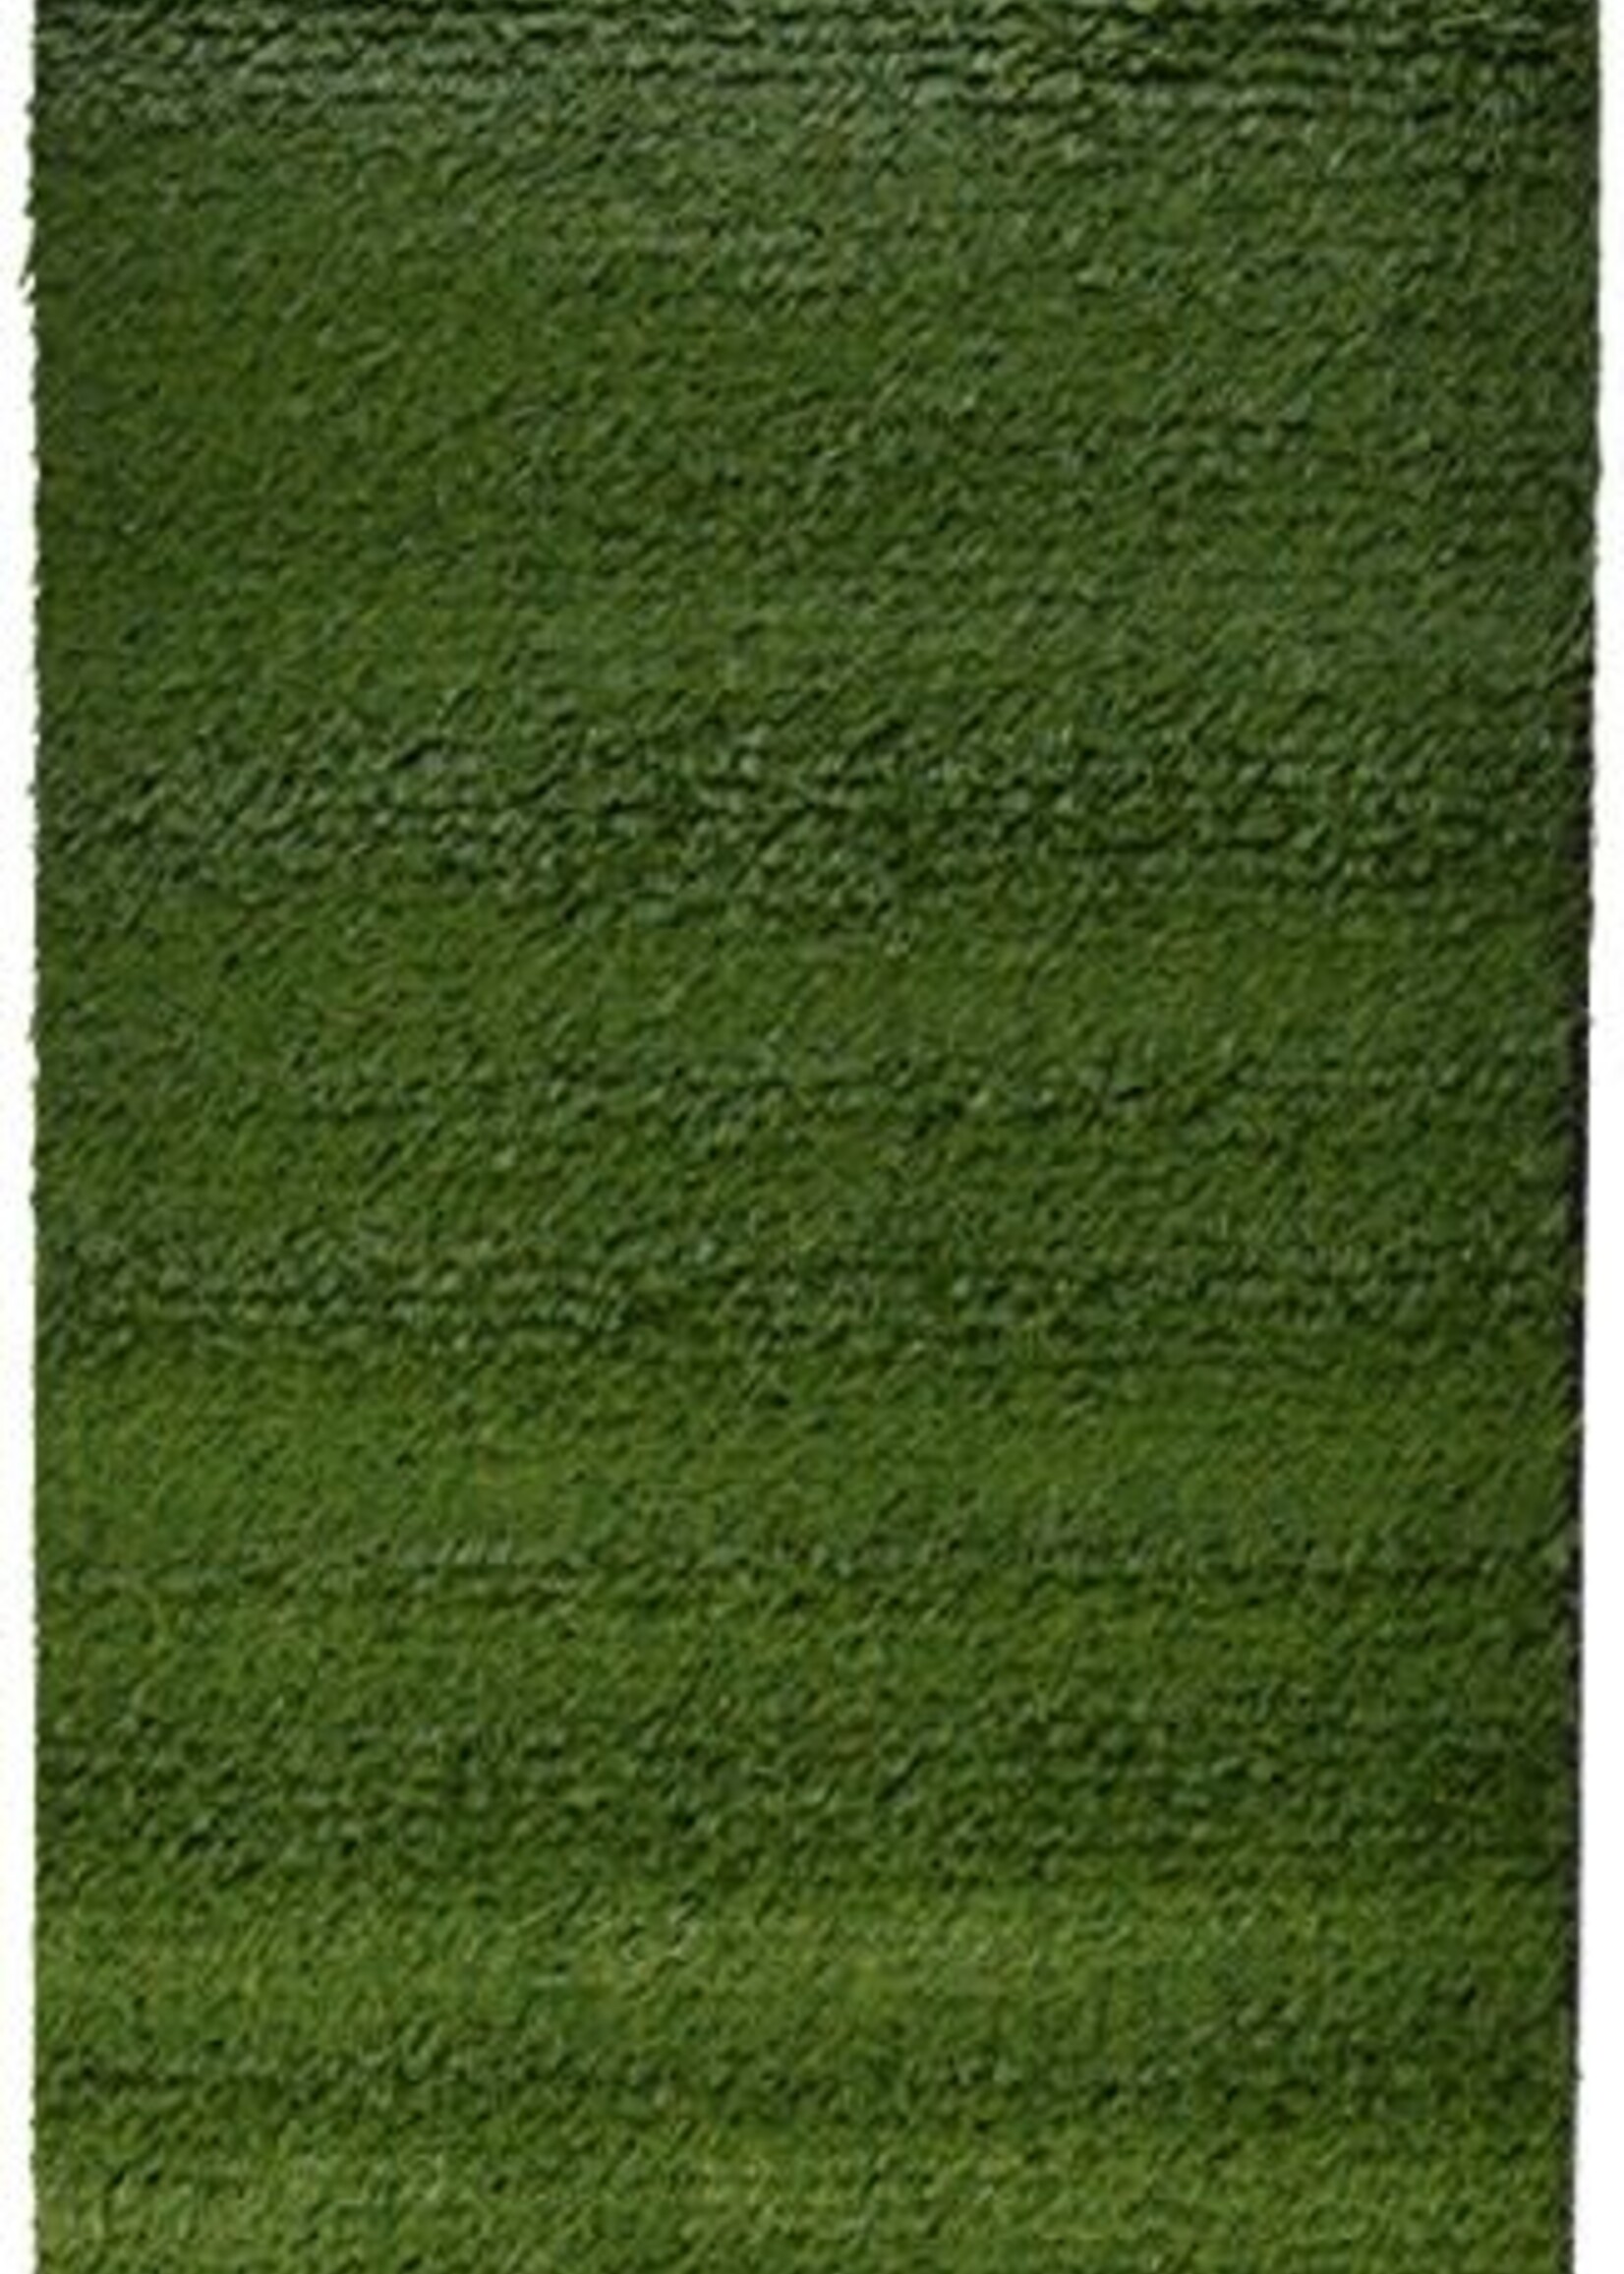 Pooch Pad Indoor Turf Dog Potty Replacement Grass Connectable 16x24